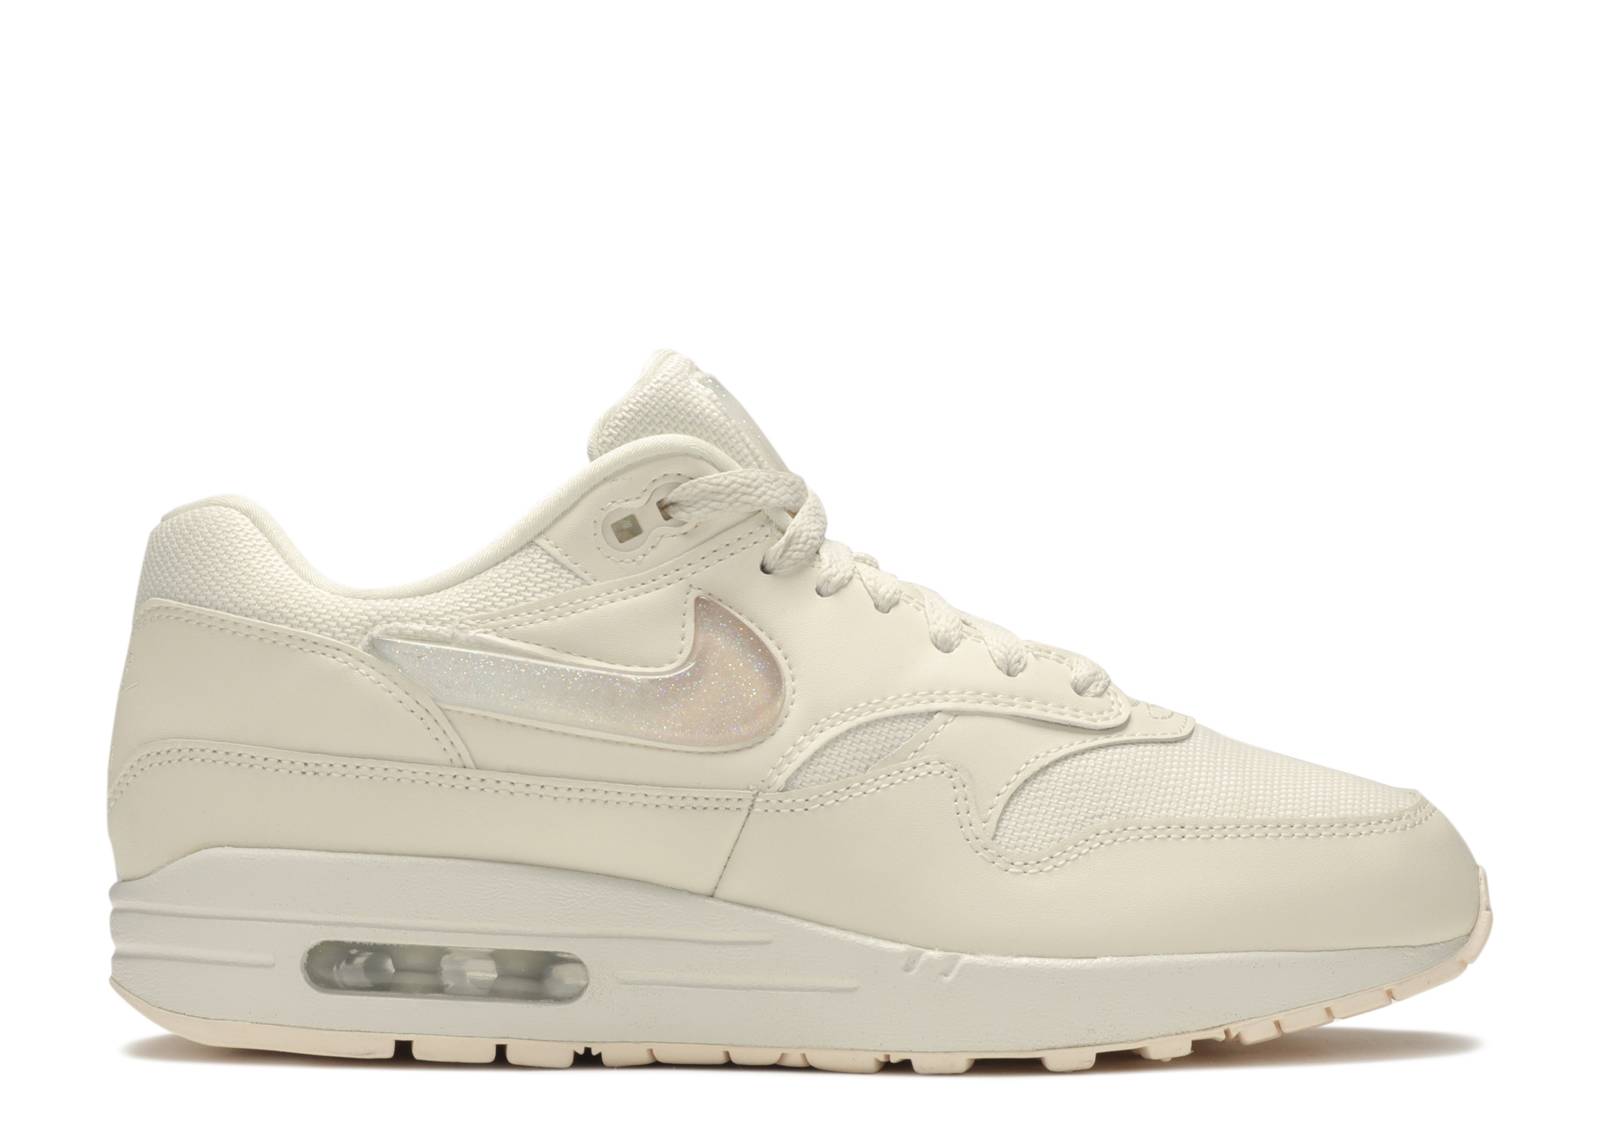 Wmns Air Max 1 'Jelly Jewel - Pale Ivory'